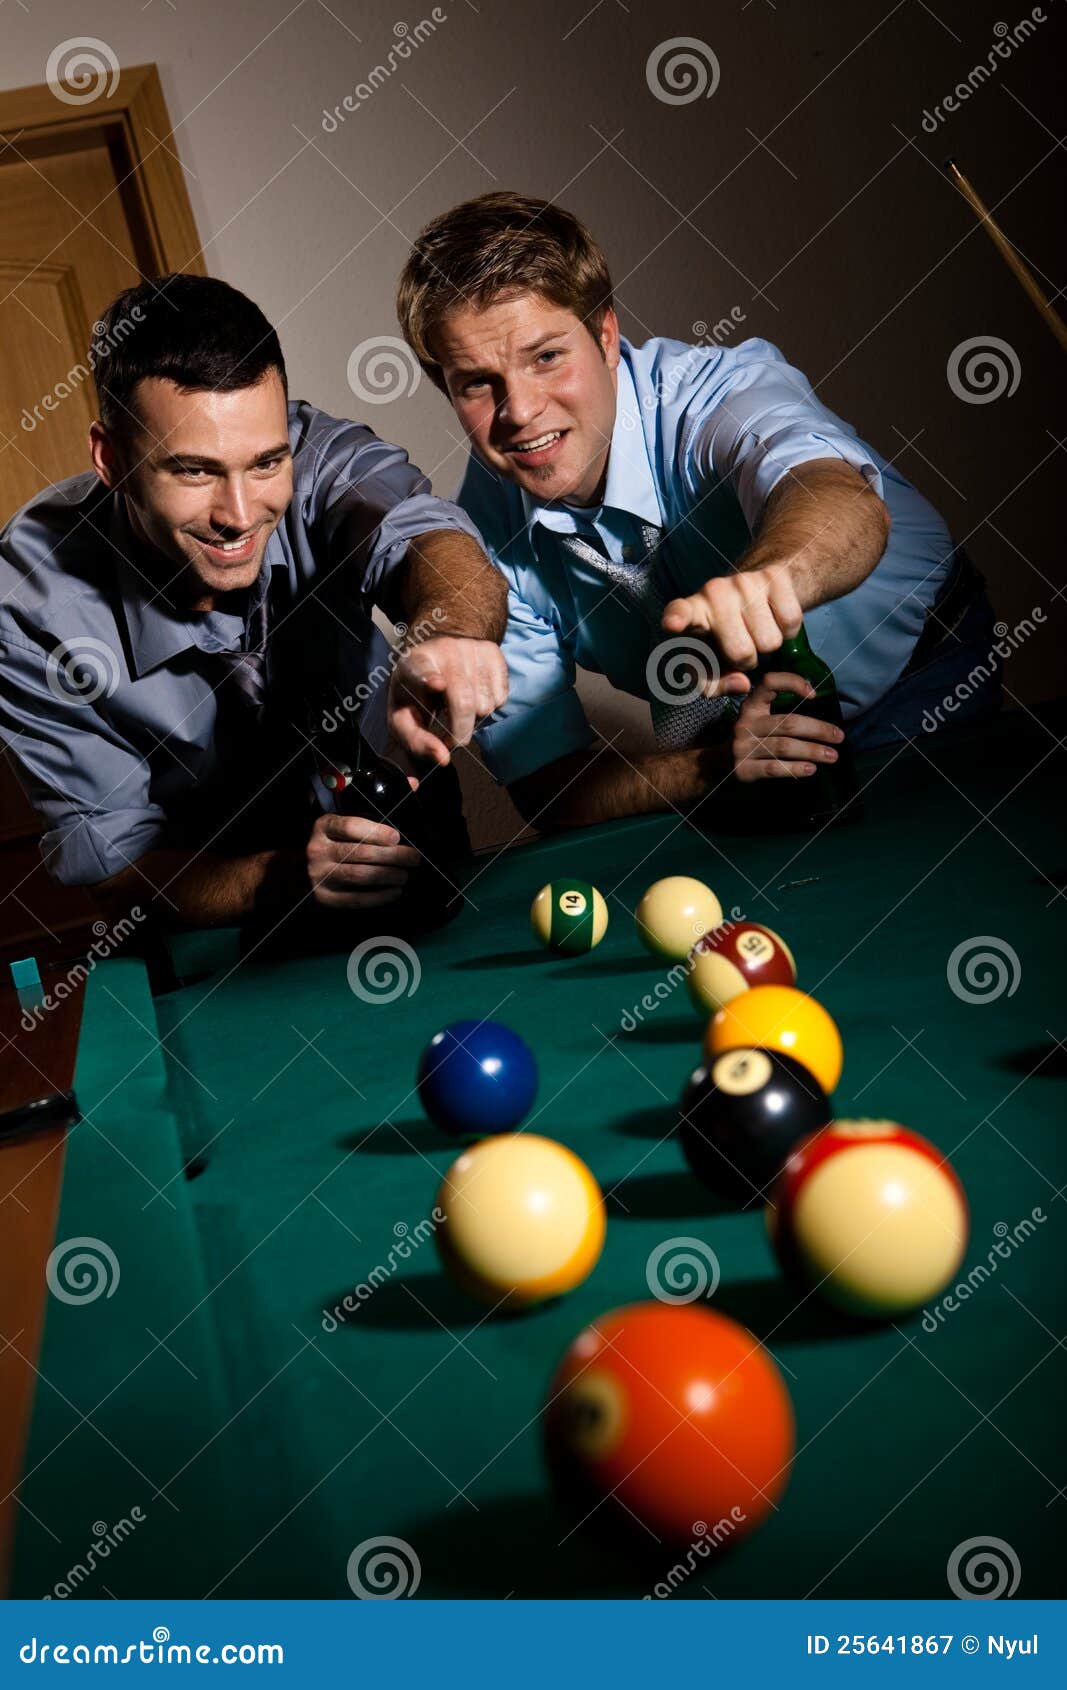 Photos Of Men On Snooker Table 51